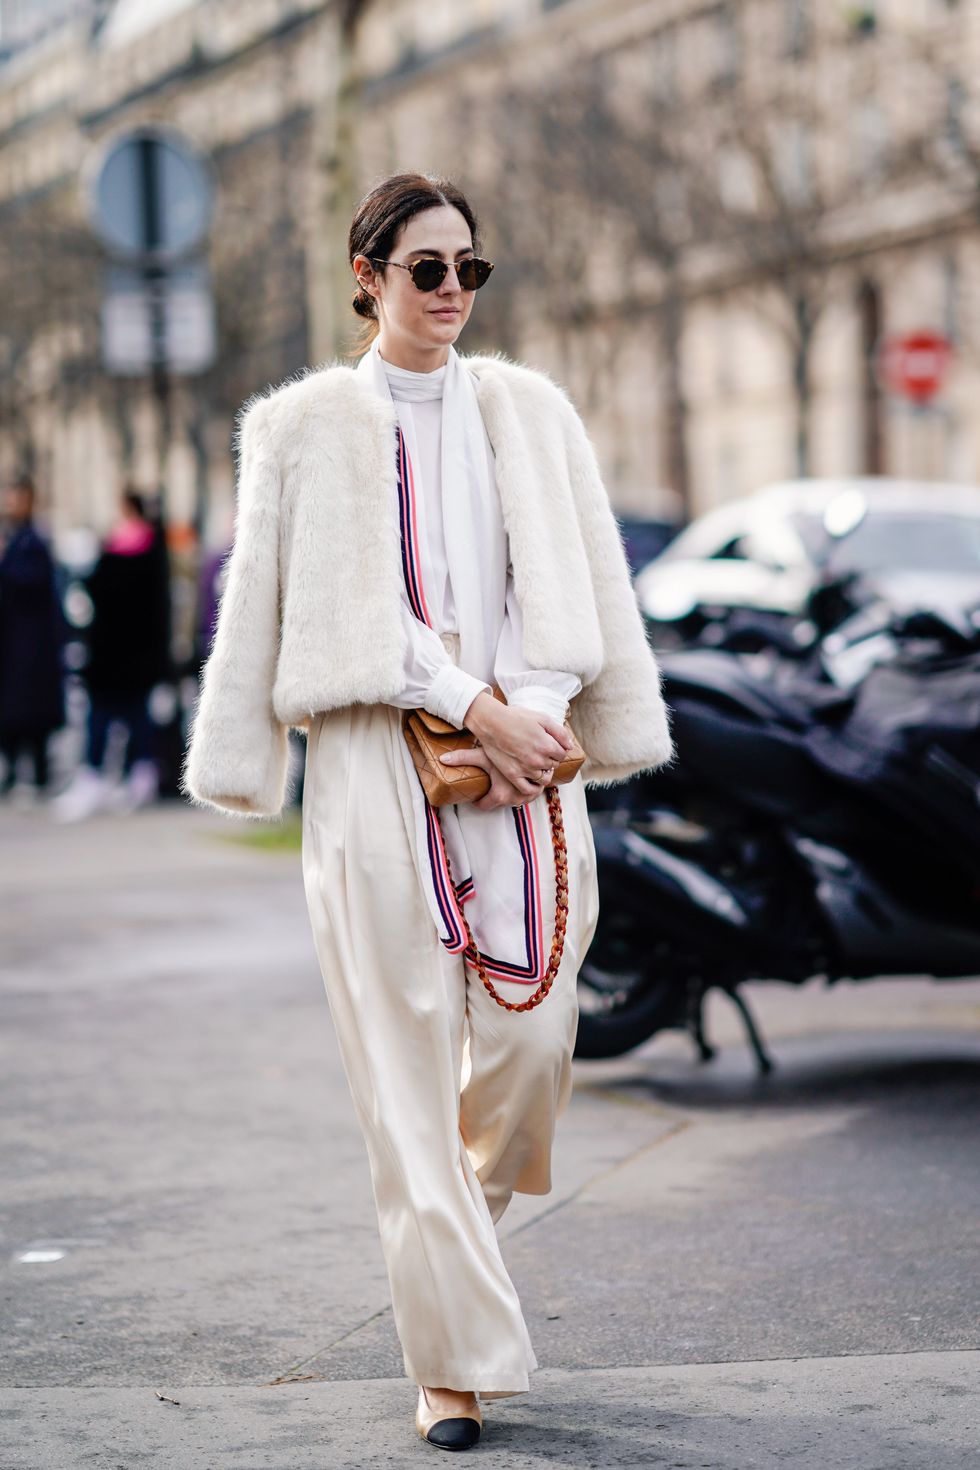 17 Looks That Prove Neutrals Are Better Than Pastels for Spring - Brit + Co